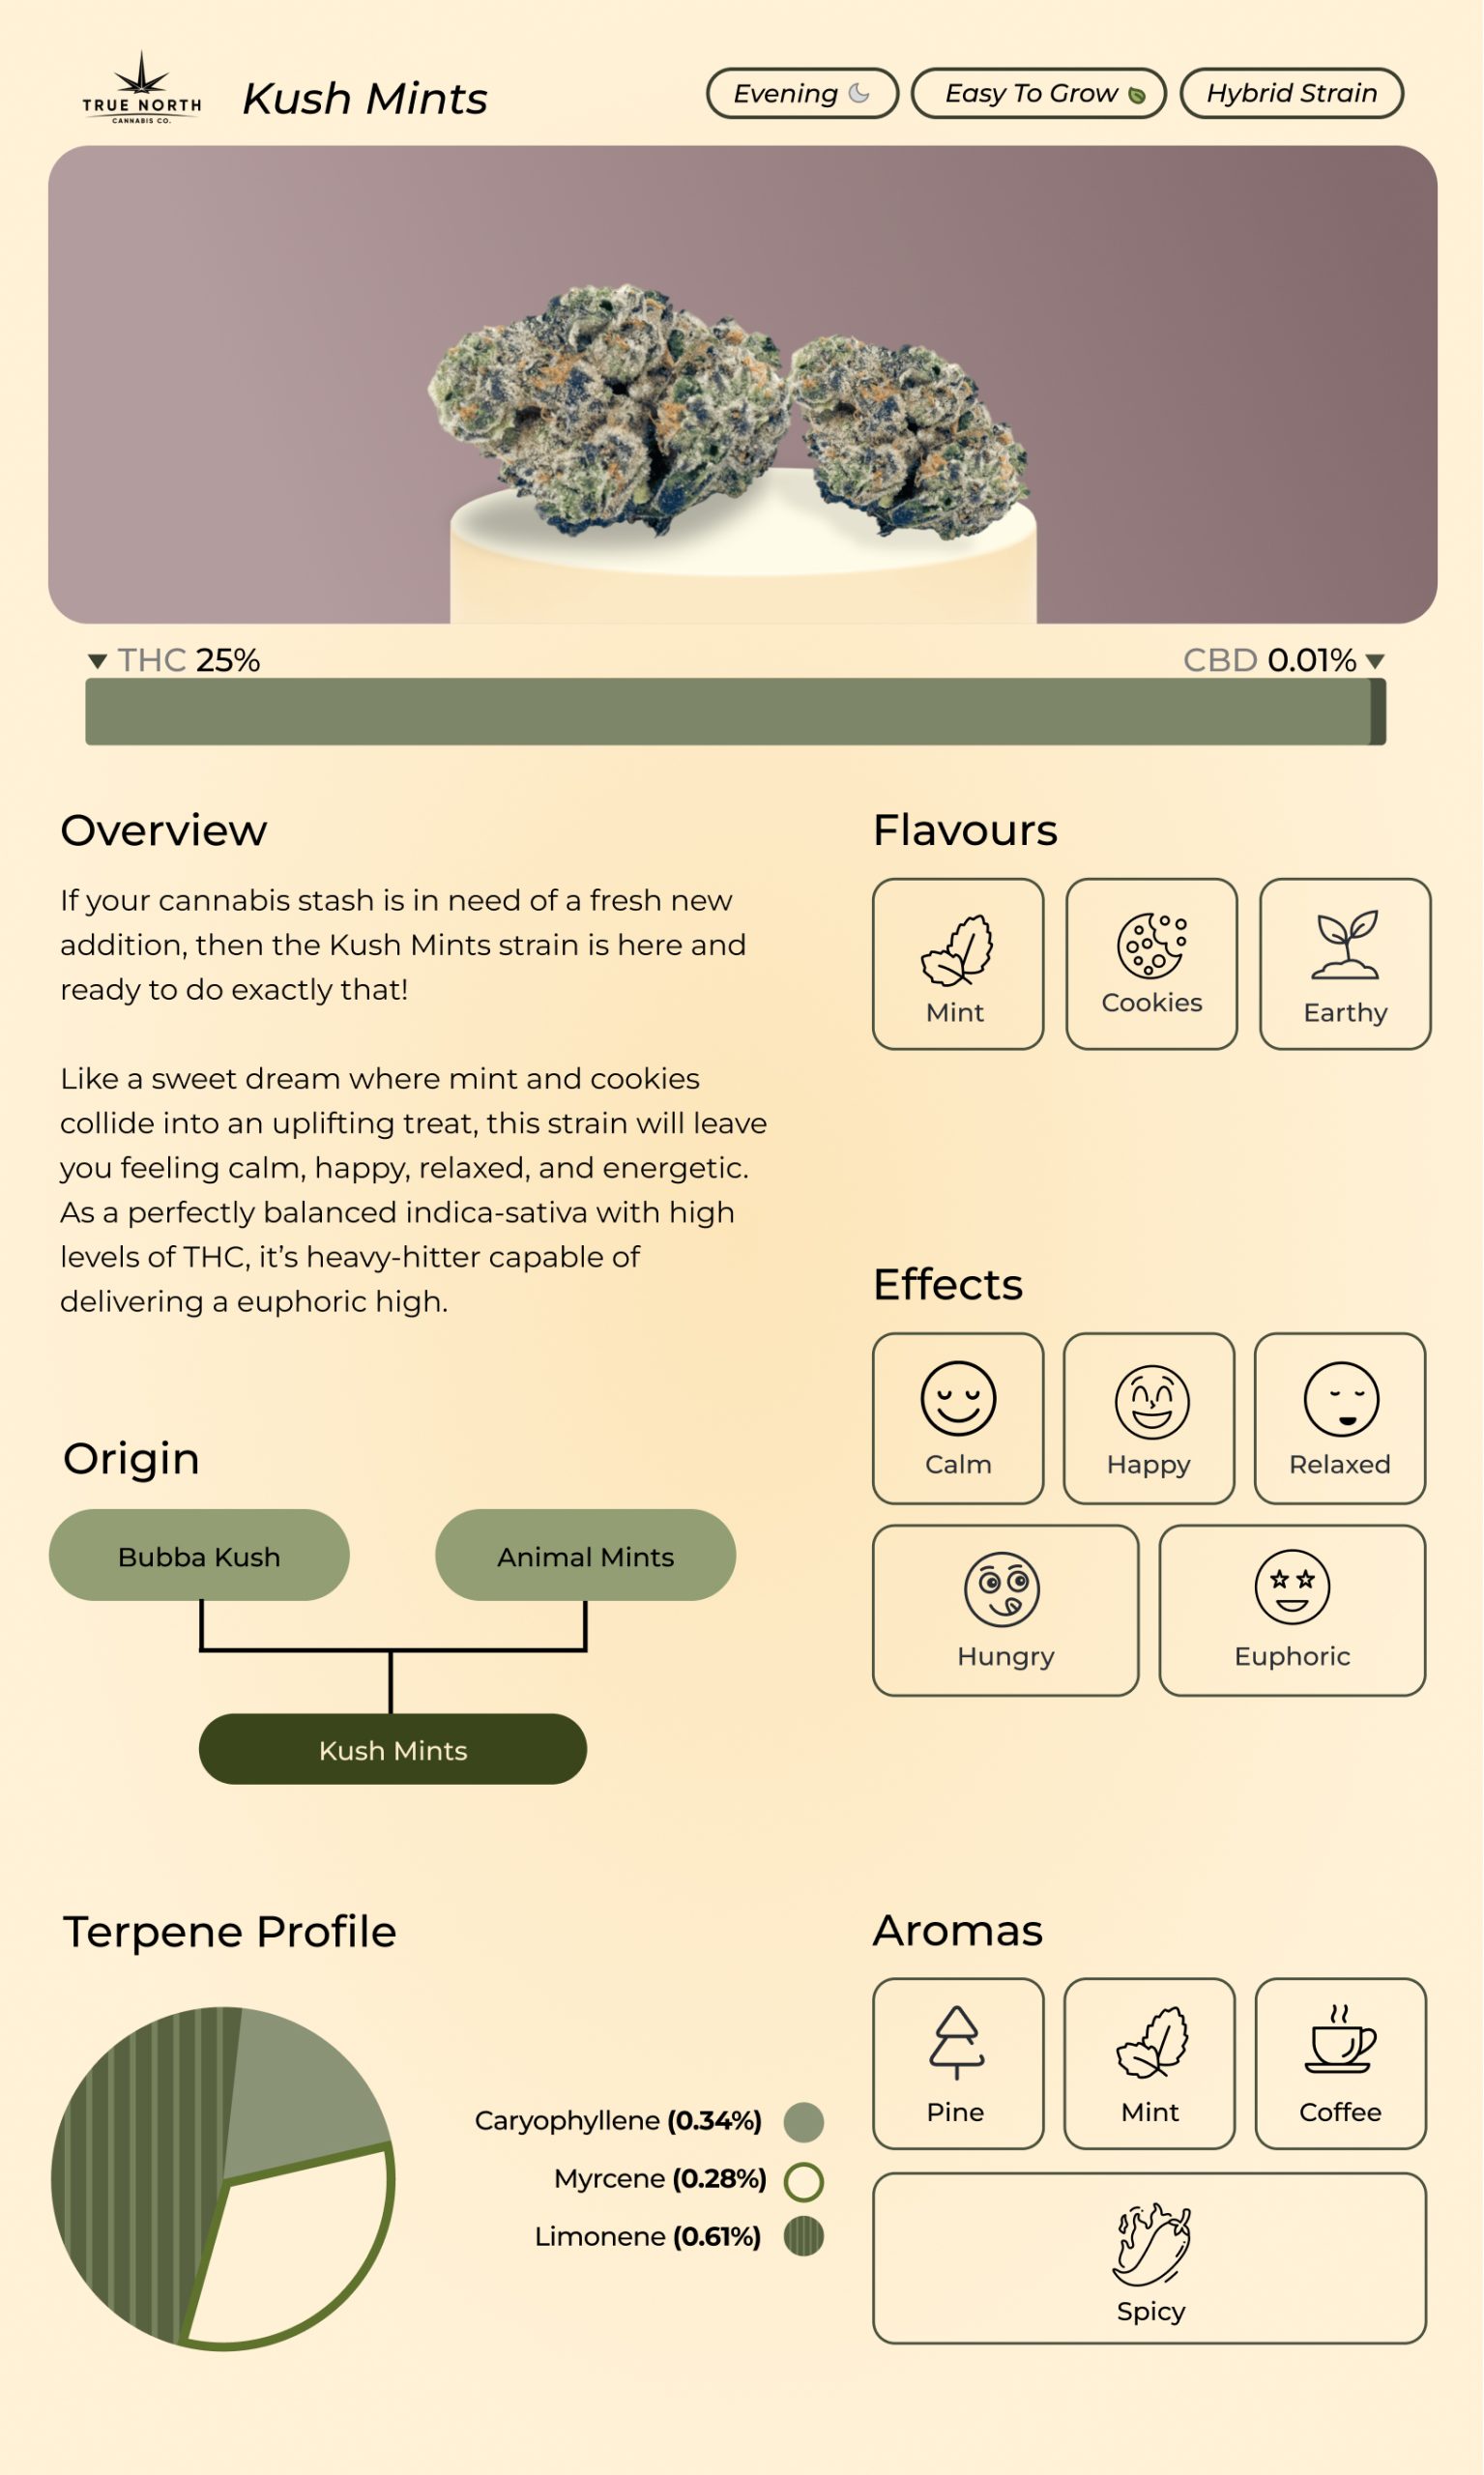 An infographic depicting the Kush Mints strain profile, including its aroma, flavours, genetics, and terpenes